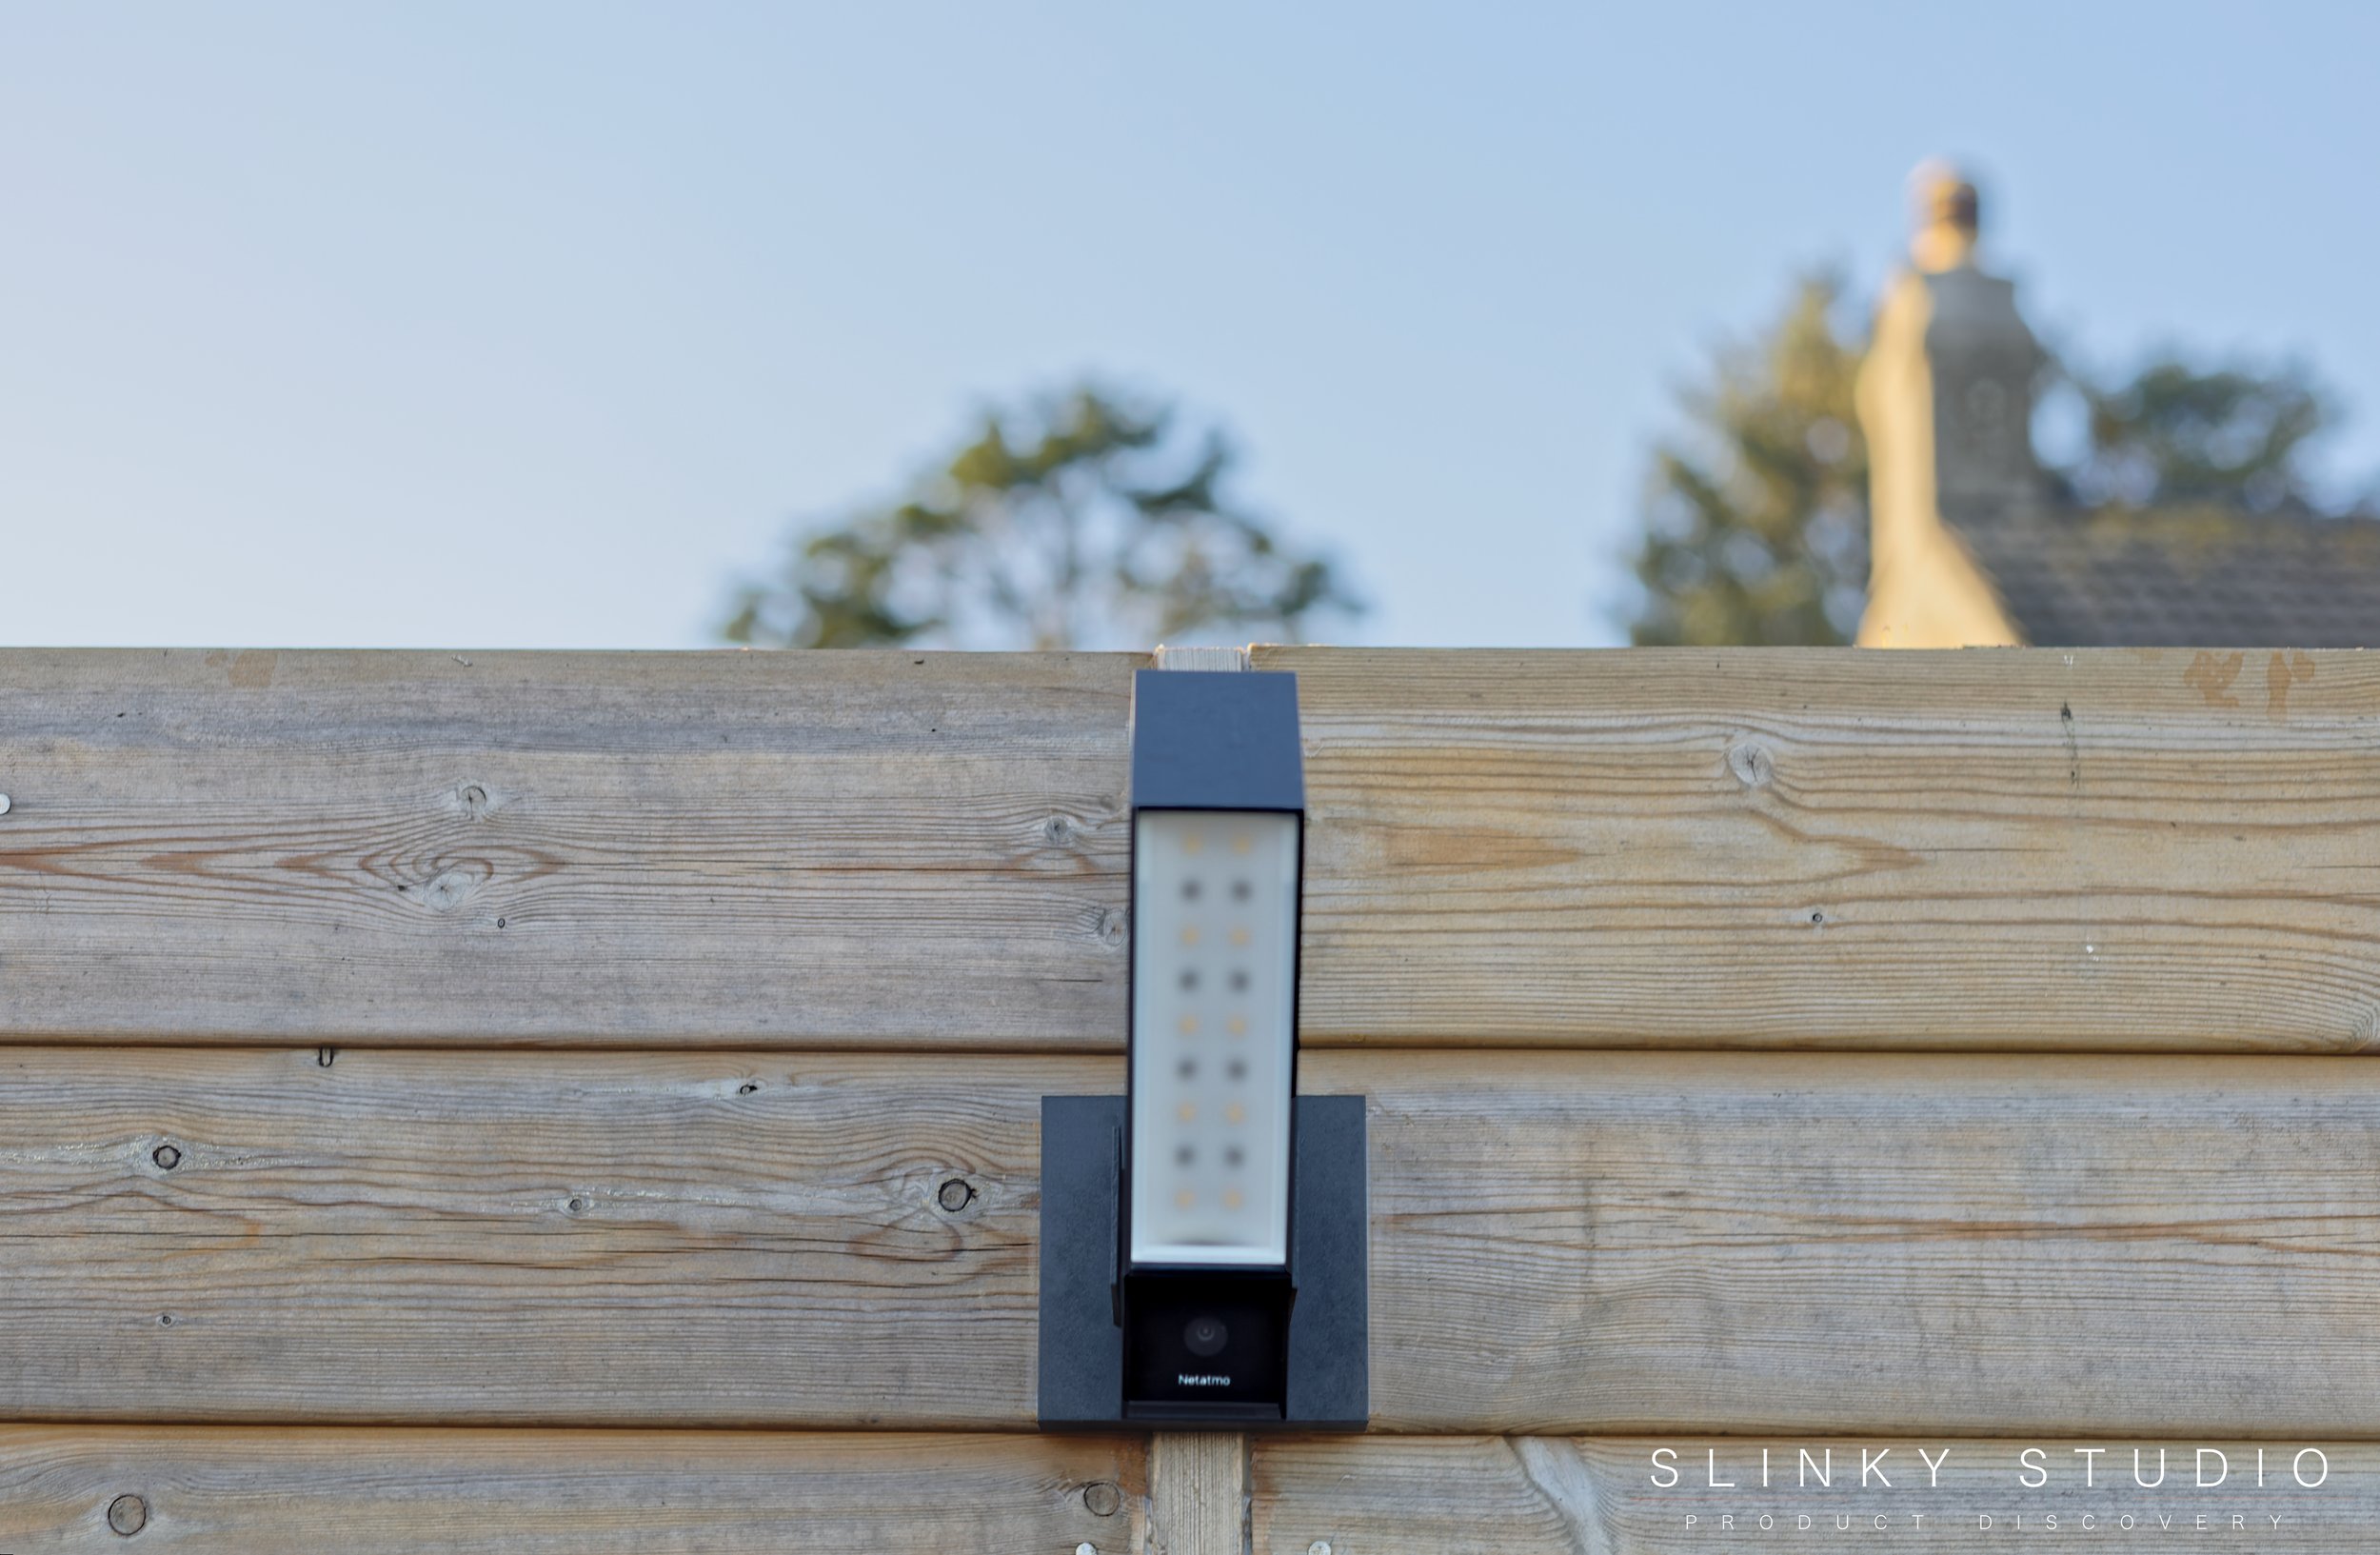 Netatmo Smart Alarm System with Camera review: This jumble of